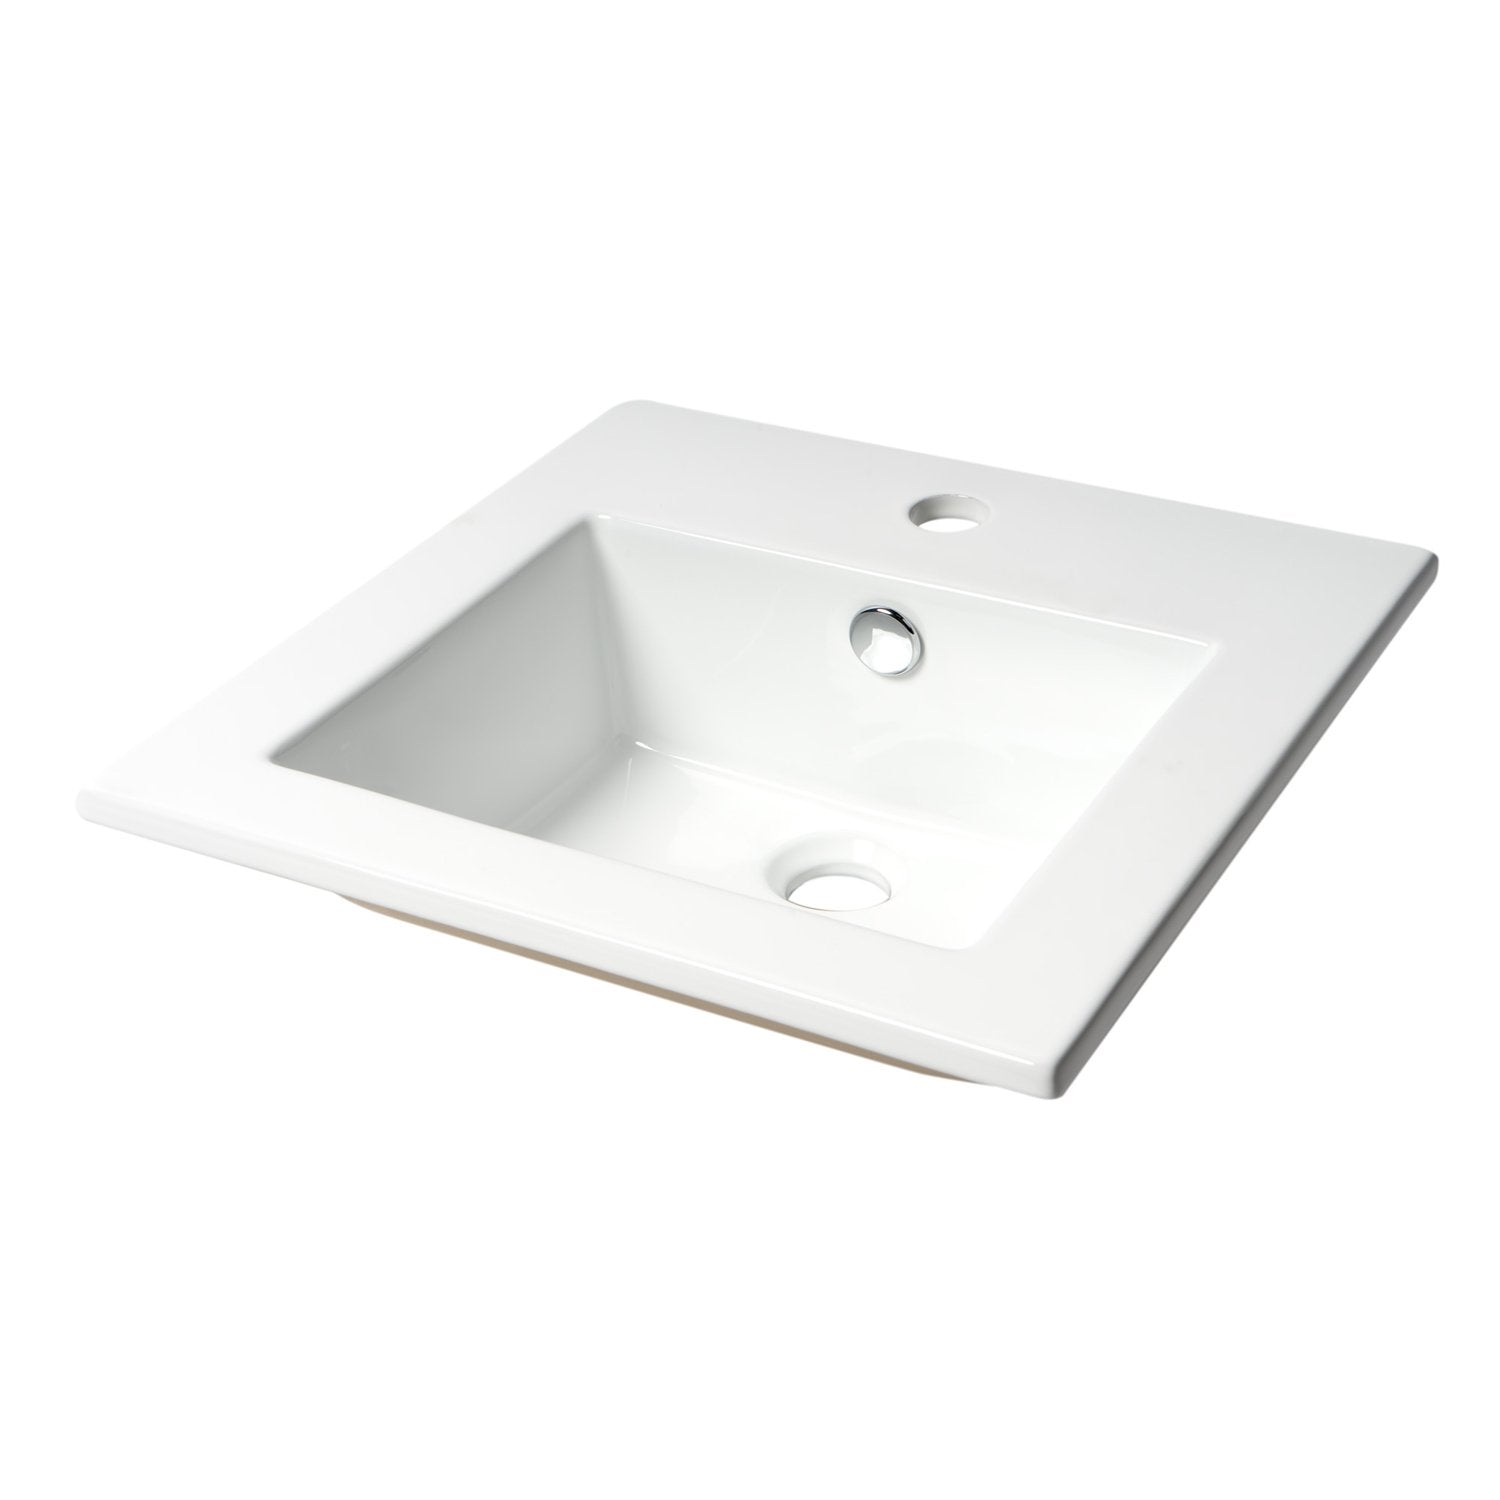 ALFI ABC801 White 17" Square Drop In Ceramic Sink with Faucet Hole